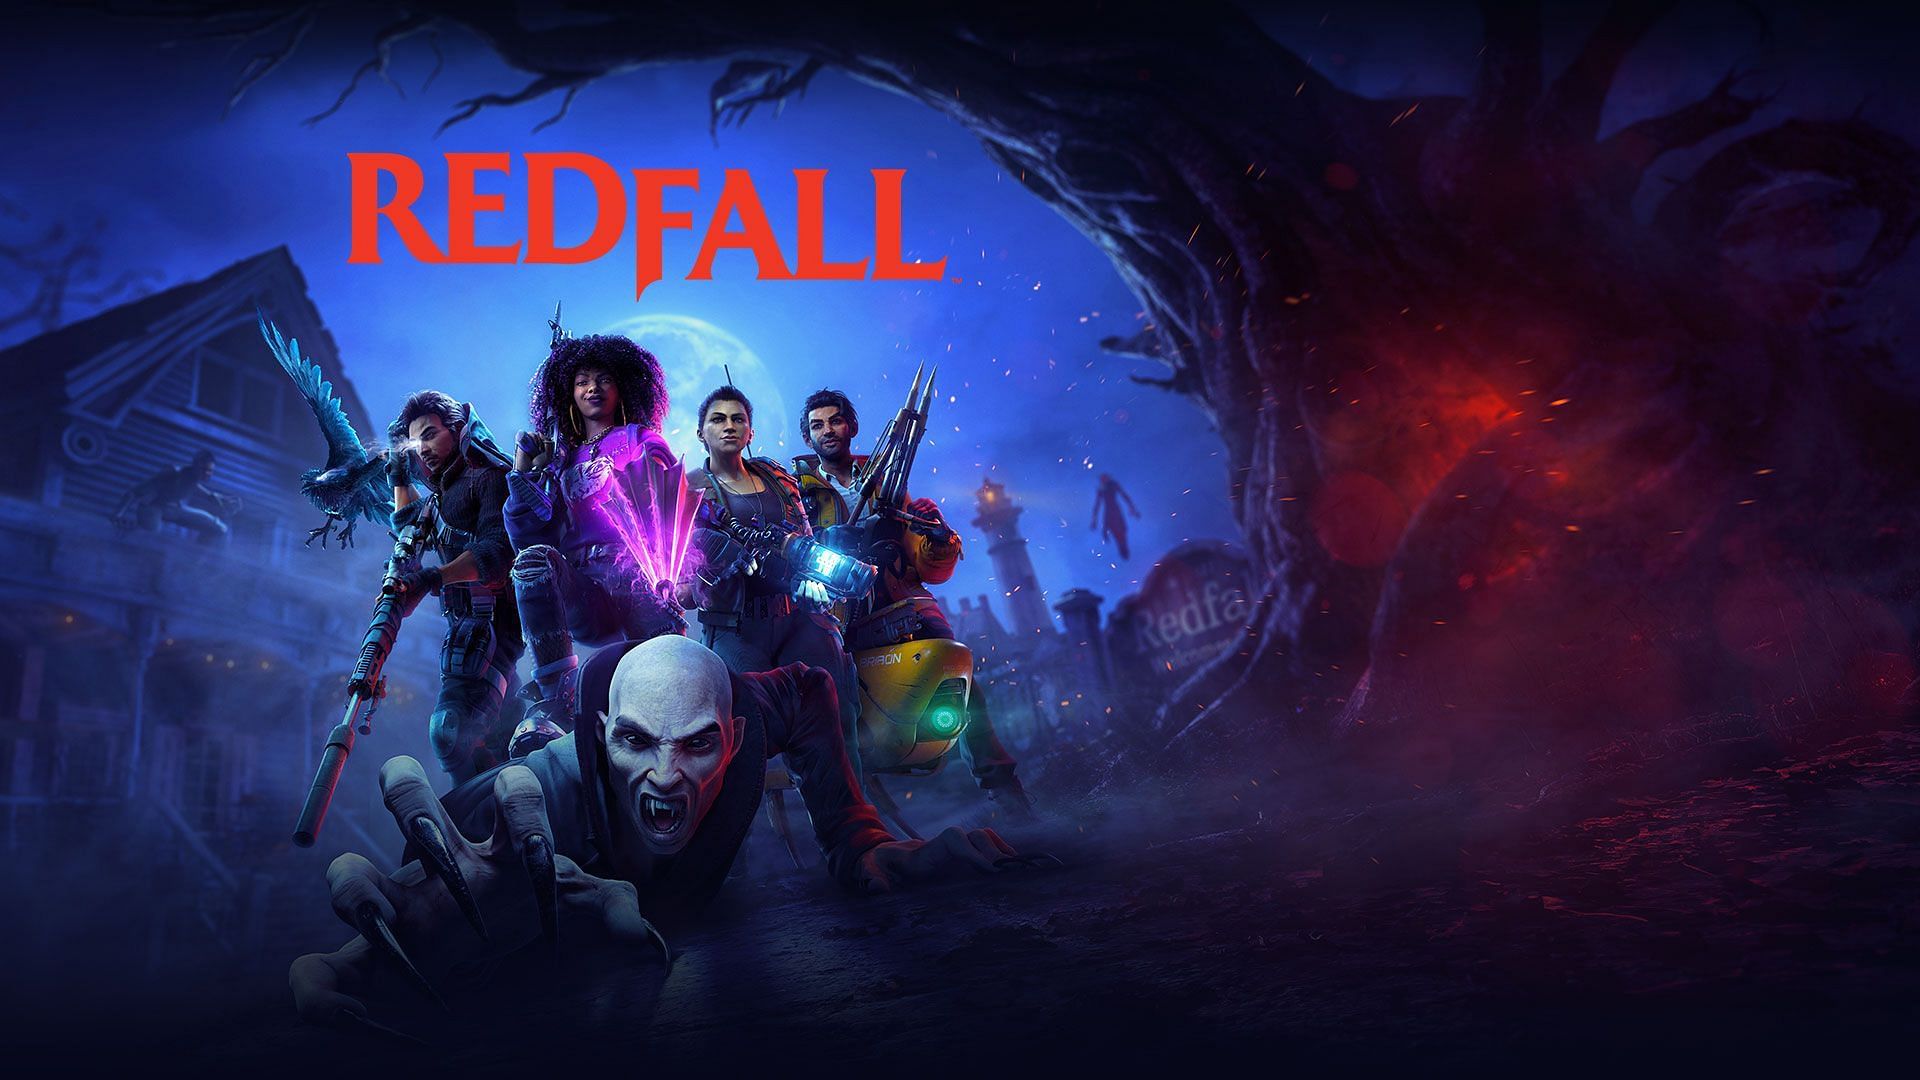 According to rumor, Redfall by Arkane could be delayed (Image via Arkane Studios)